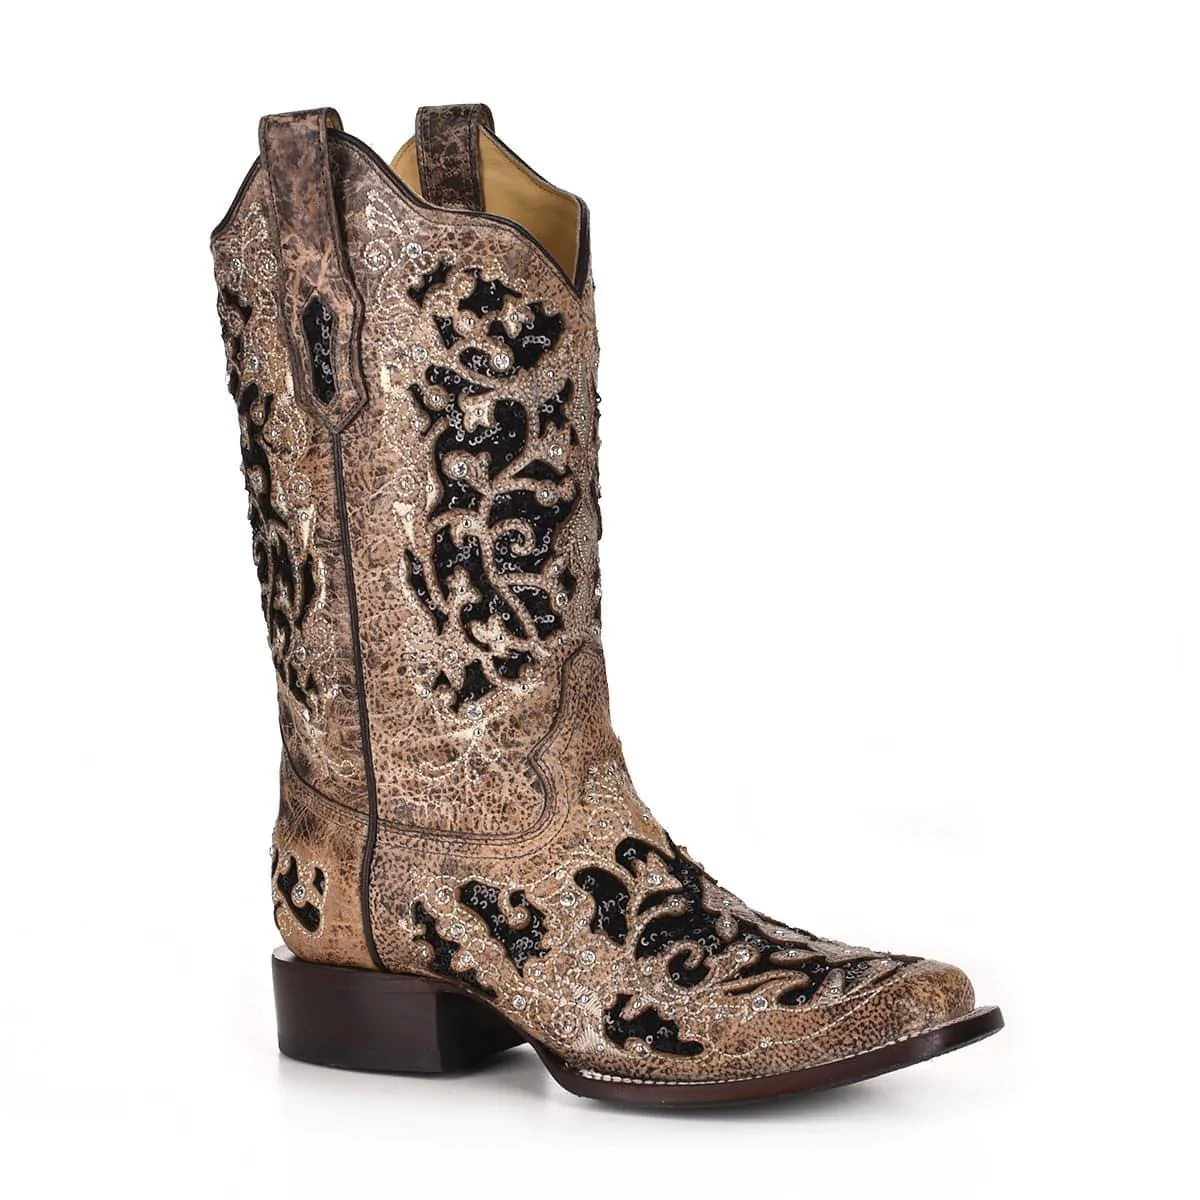 Charlotte Rustic Cowgirl Boots in Brown